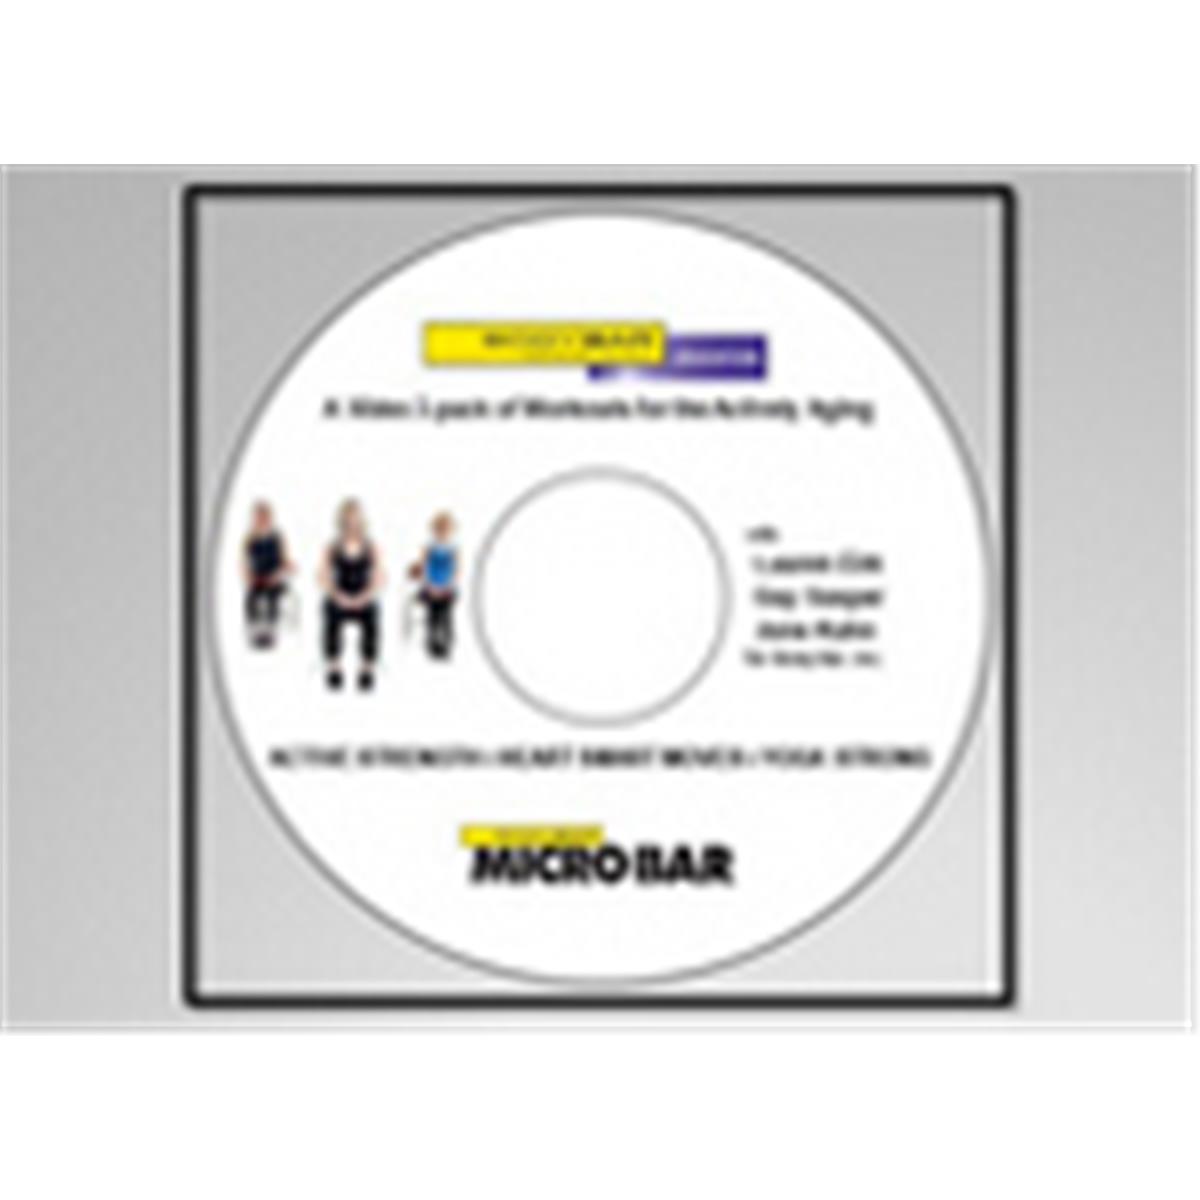 Picture of Body Bar DVD DVD-MMBAA3P Micro Bar Active Aging Video - Pack of 3